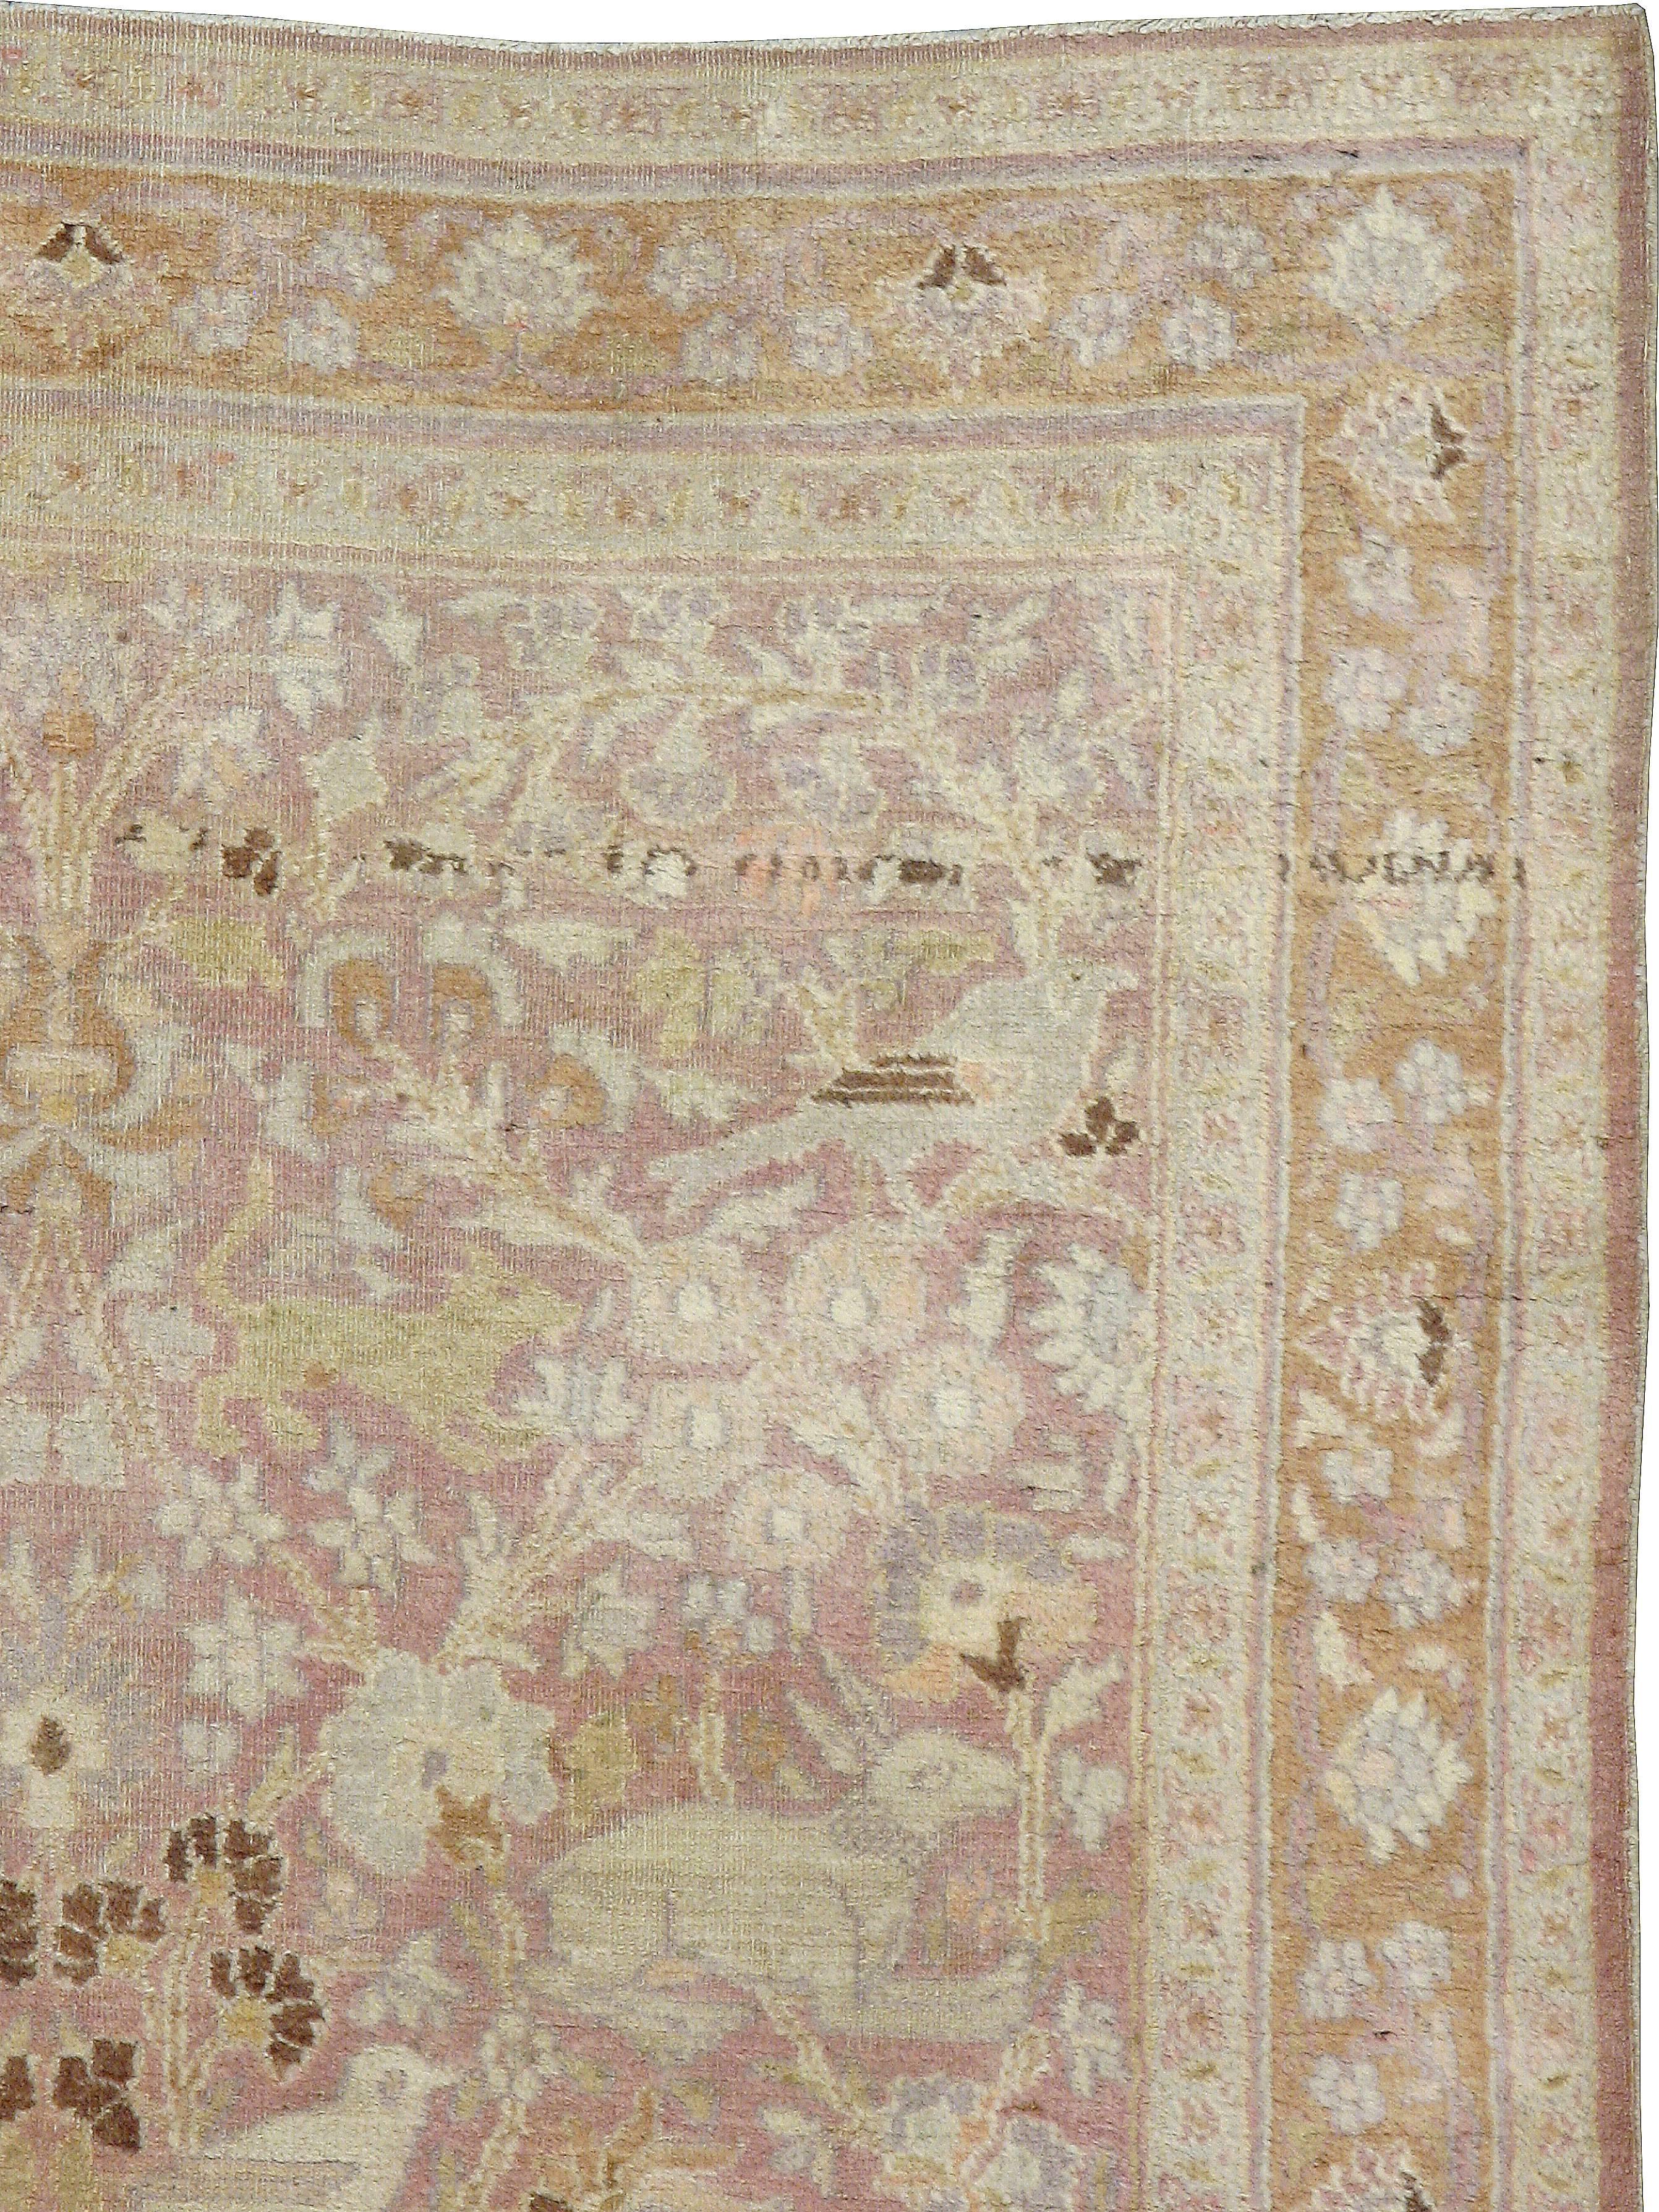 An antique Persian Khorassan carpet from the turn of the 20th century with a pictorial hunting ground motif.